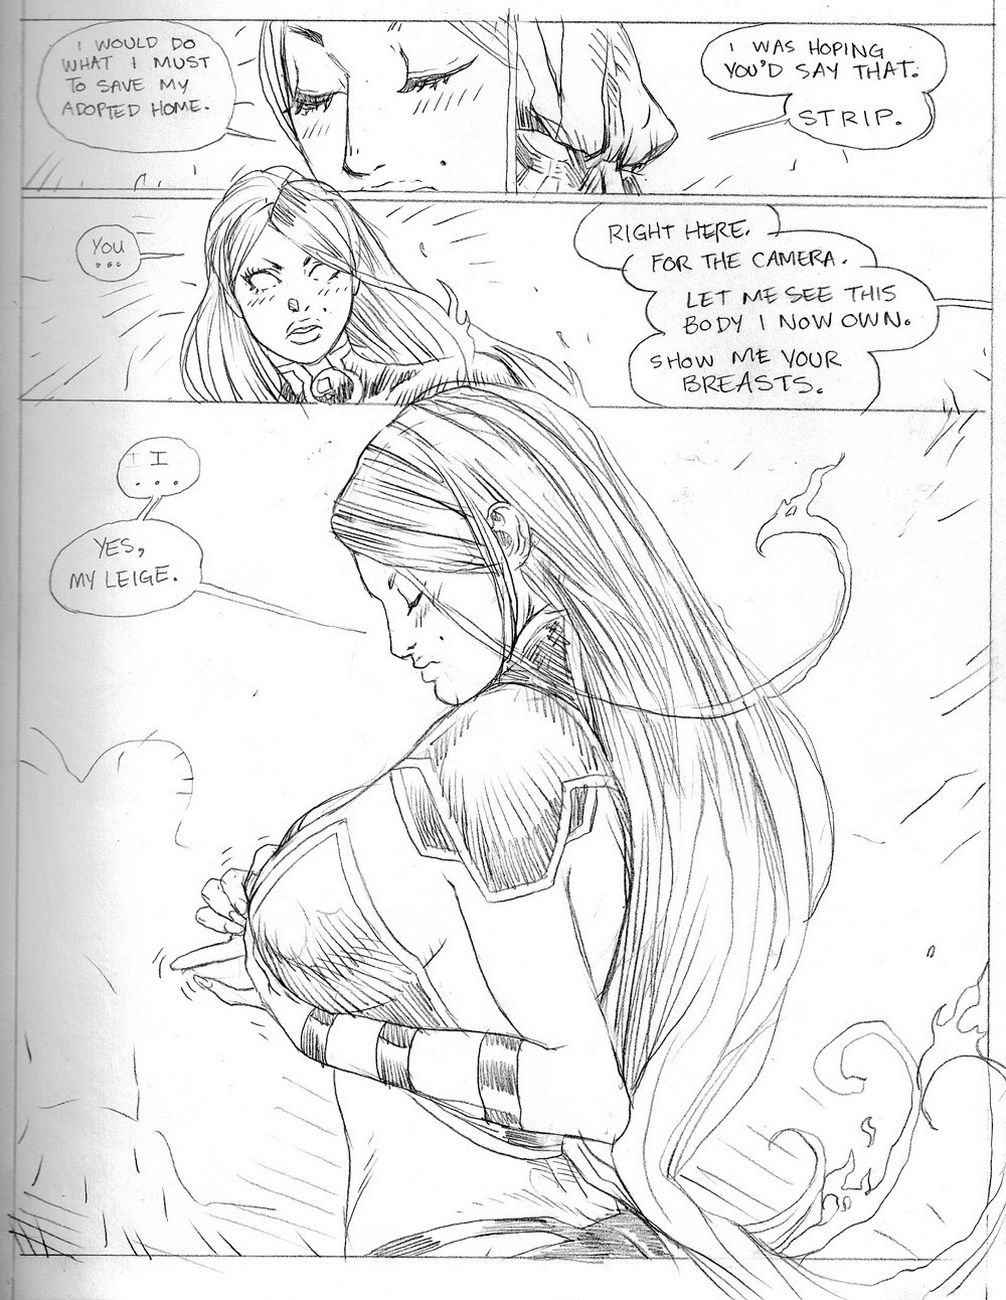 Whores Of Darkseid 3 - Starfire page 6